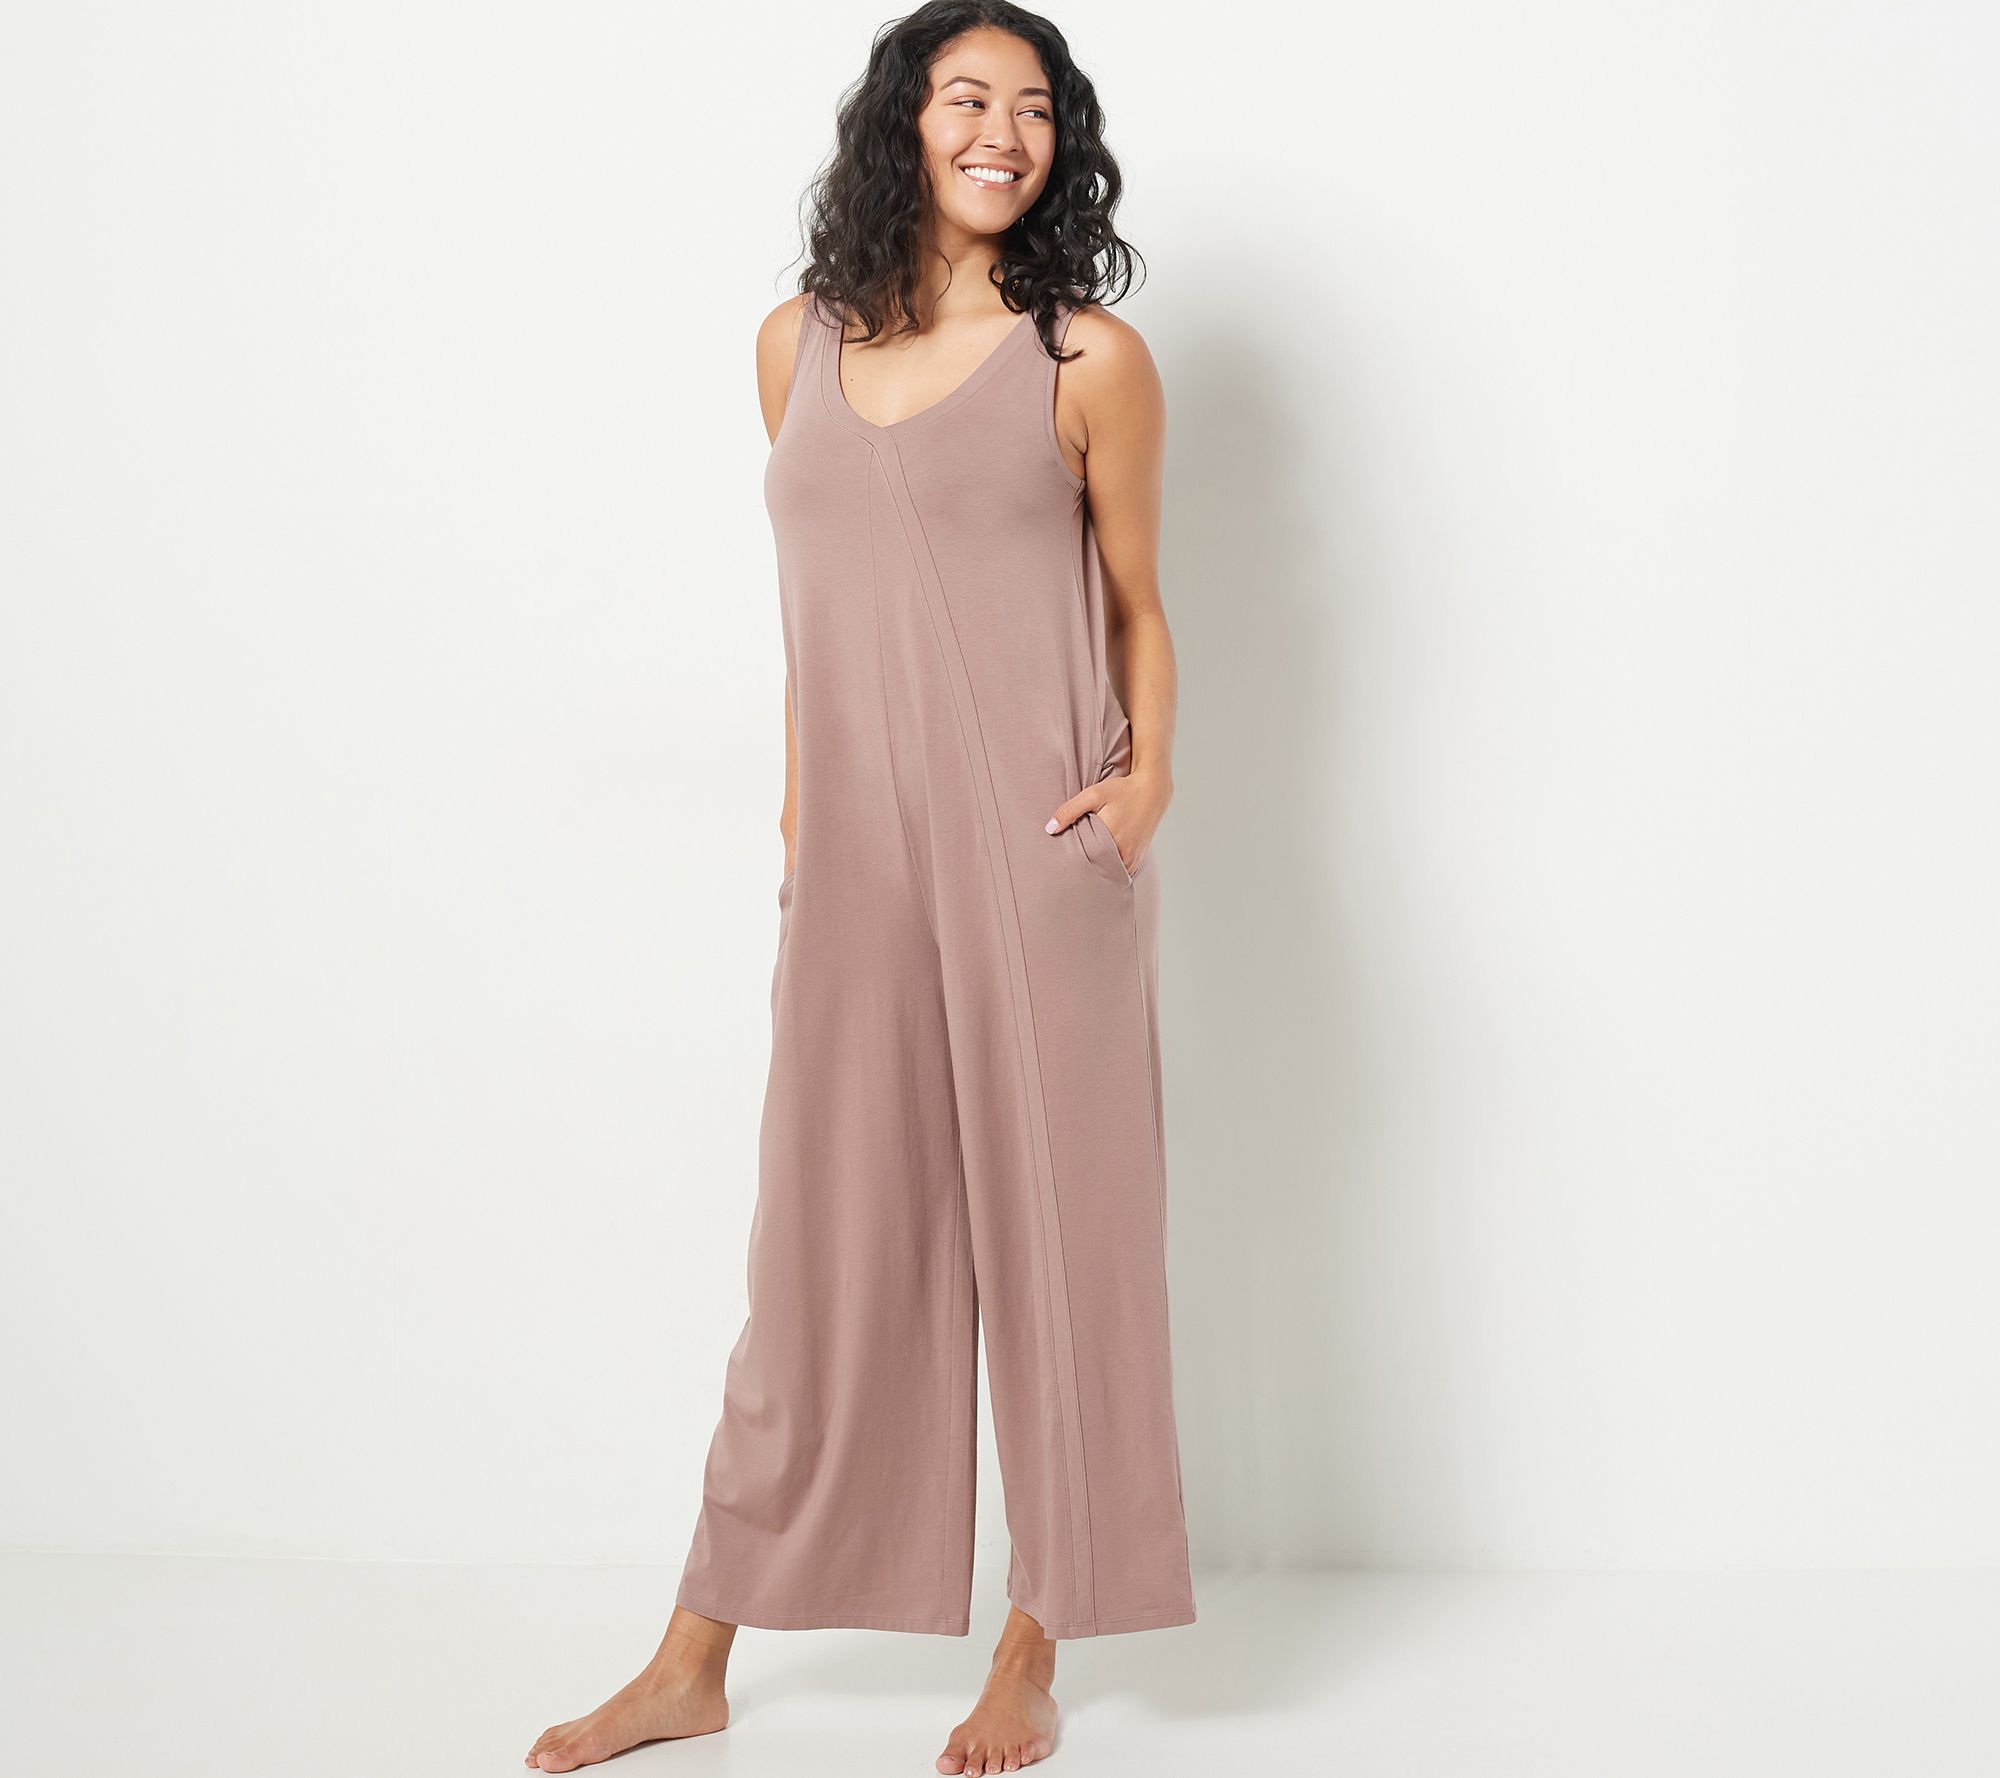 LOGO Lounge by Lori Goldstein Petite French Terry Jumpsuit 